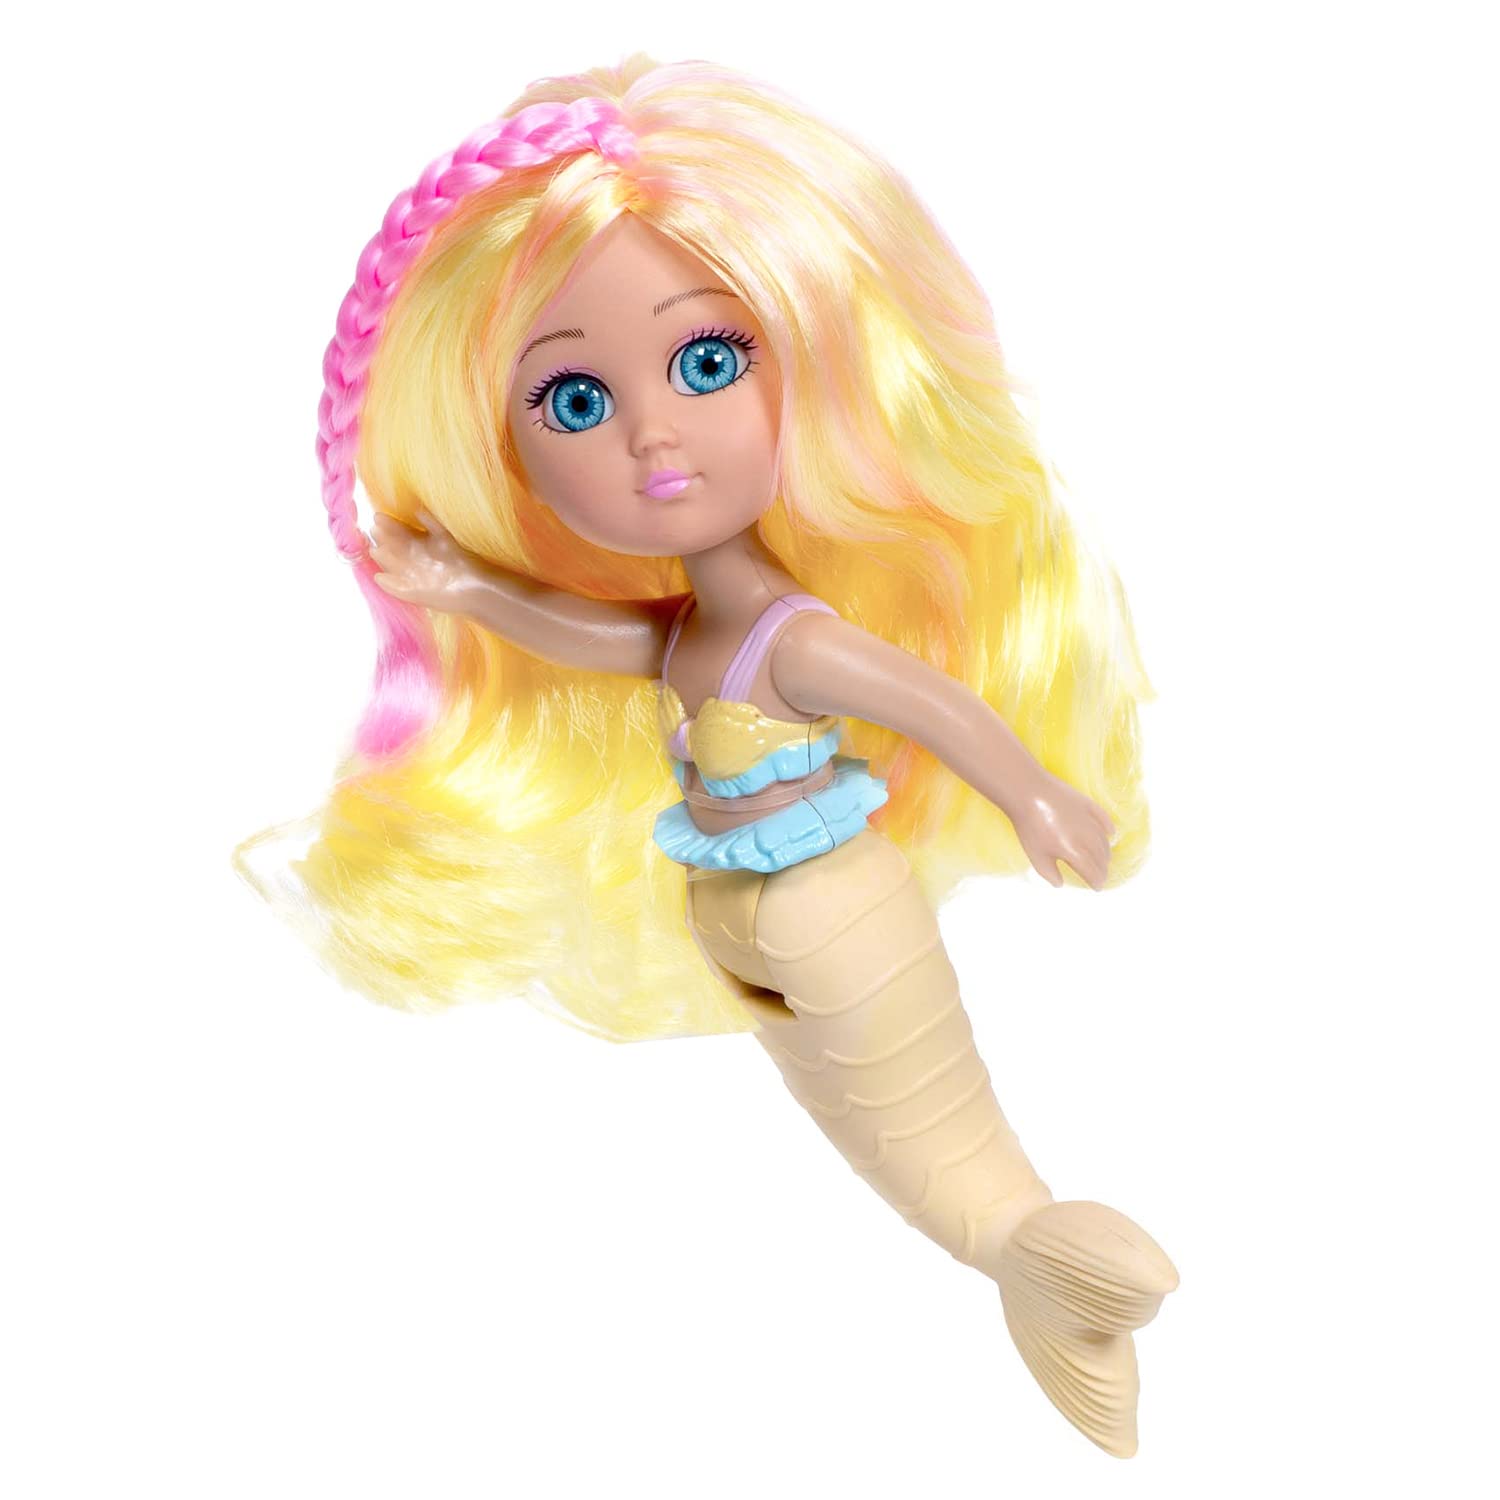 ADORA 7” Interactive Mermaid Doll with Color-Changing Tail for Fun and Imaginative Pool, Beach or Bath Time Play for Ages 1 Year Old and Up - Water Wonder Sandy